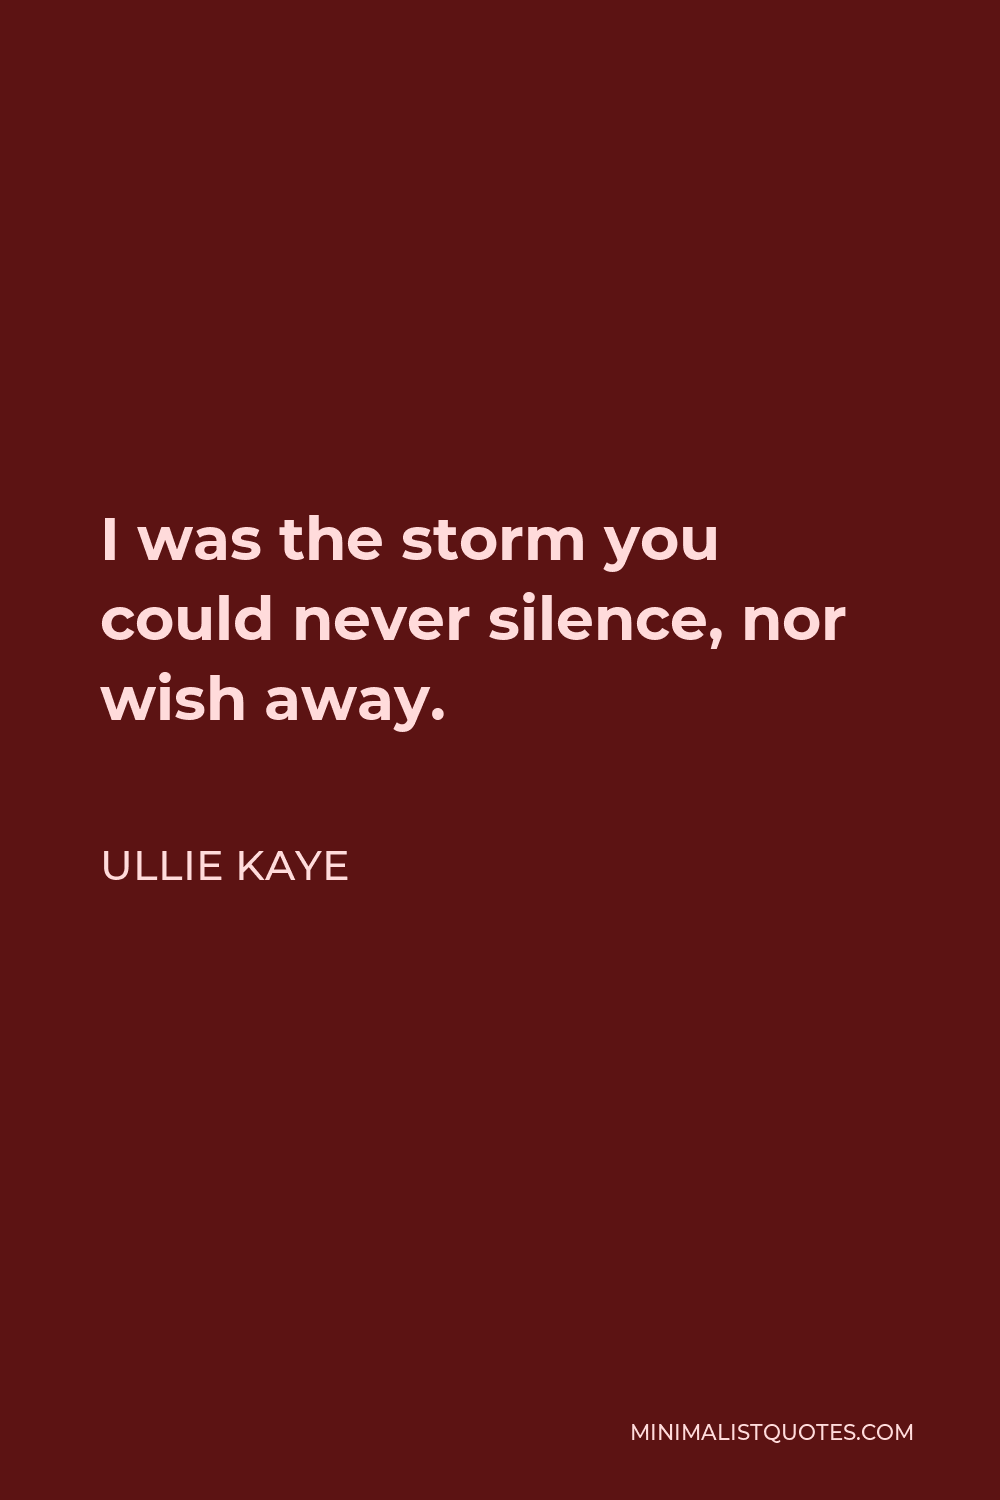 Ullie Kaye Quote - I was the storm you could never silence, nor wish away.